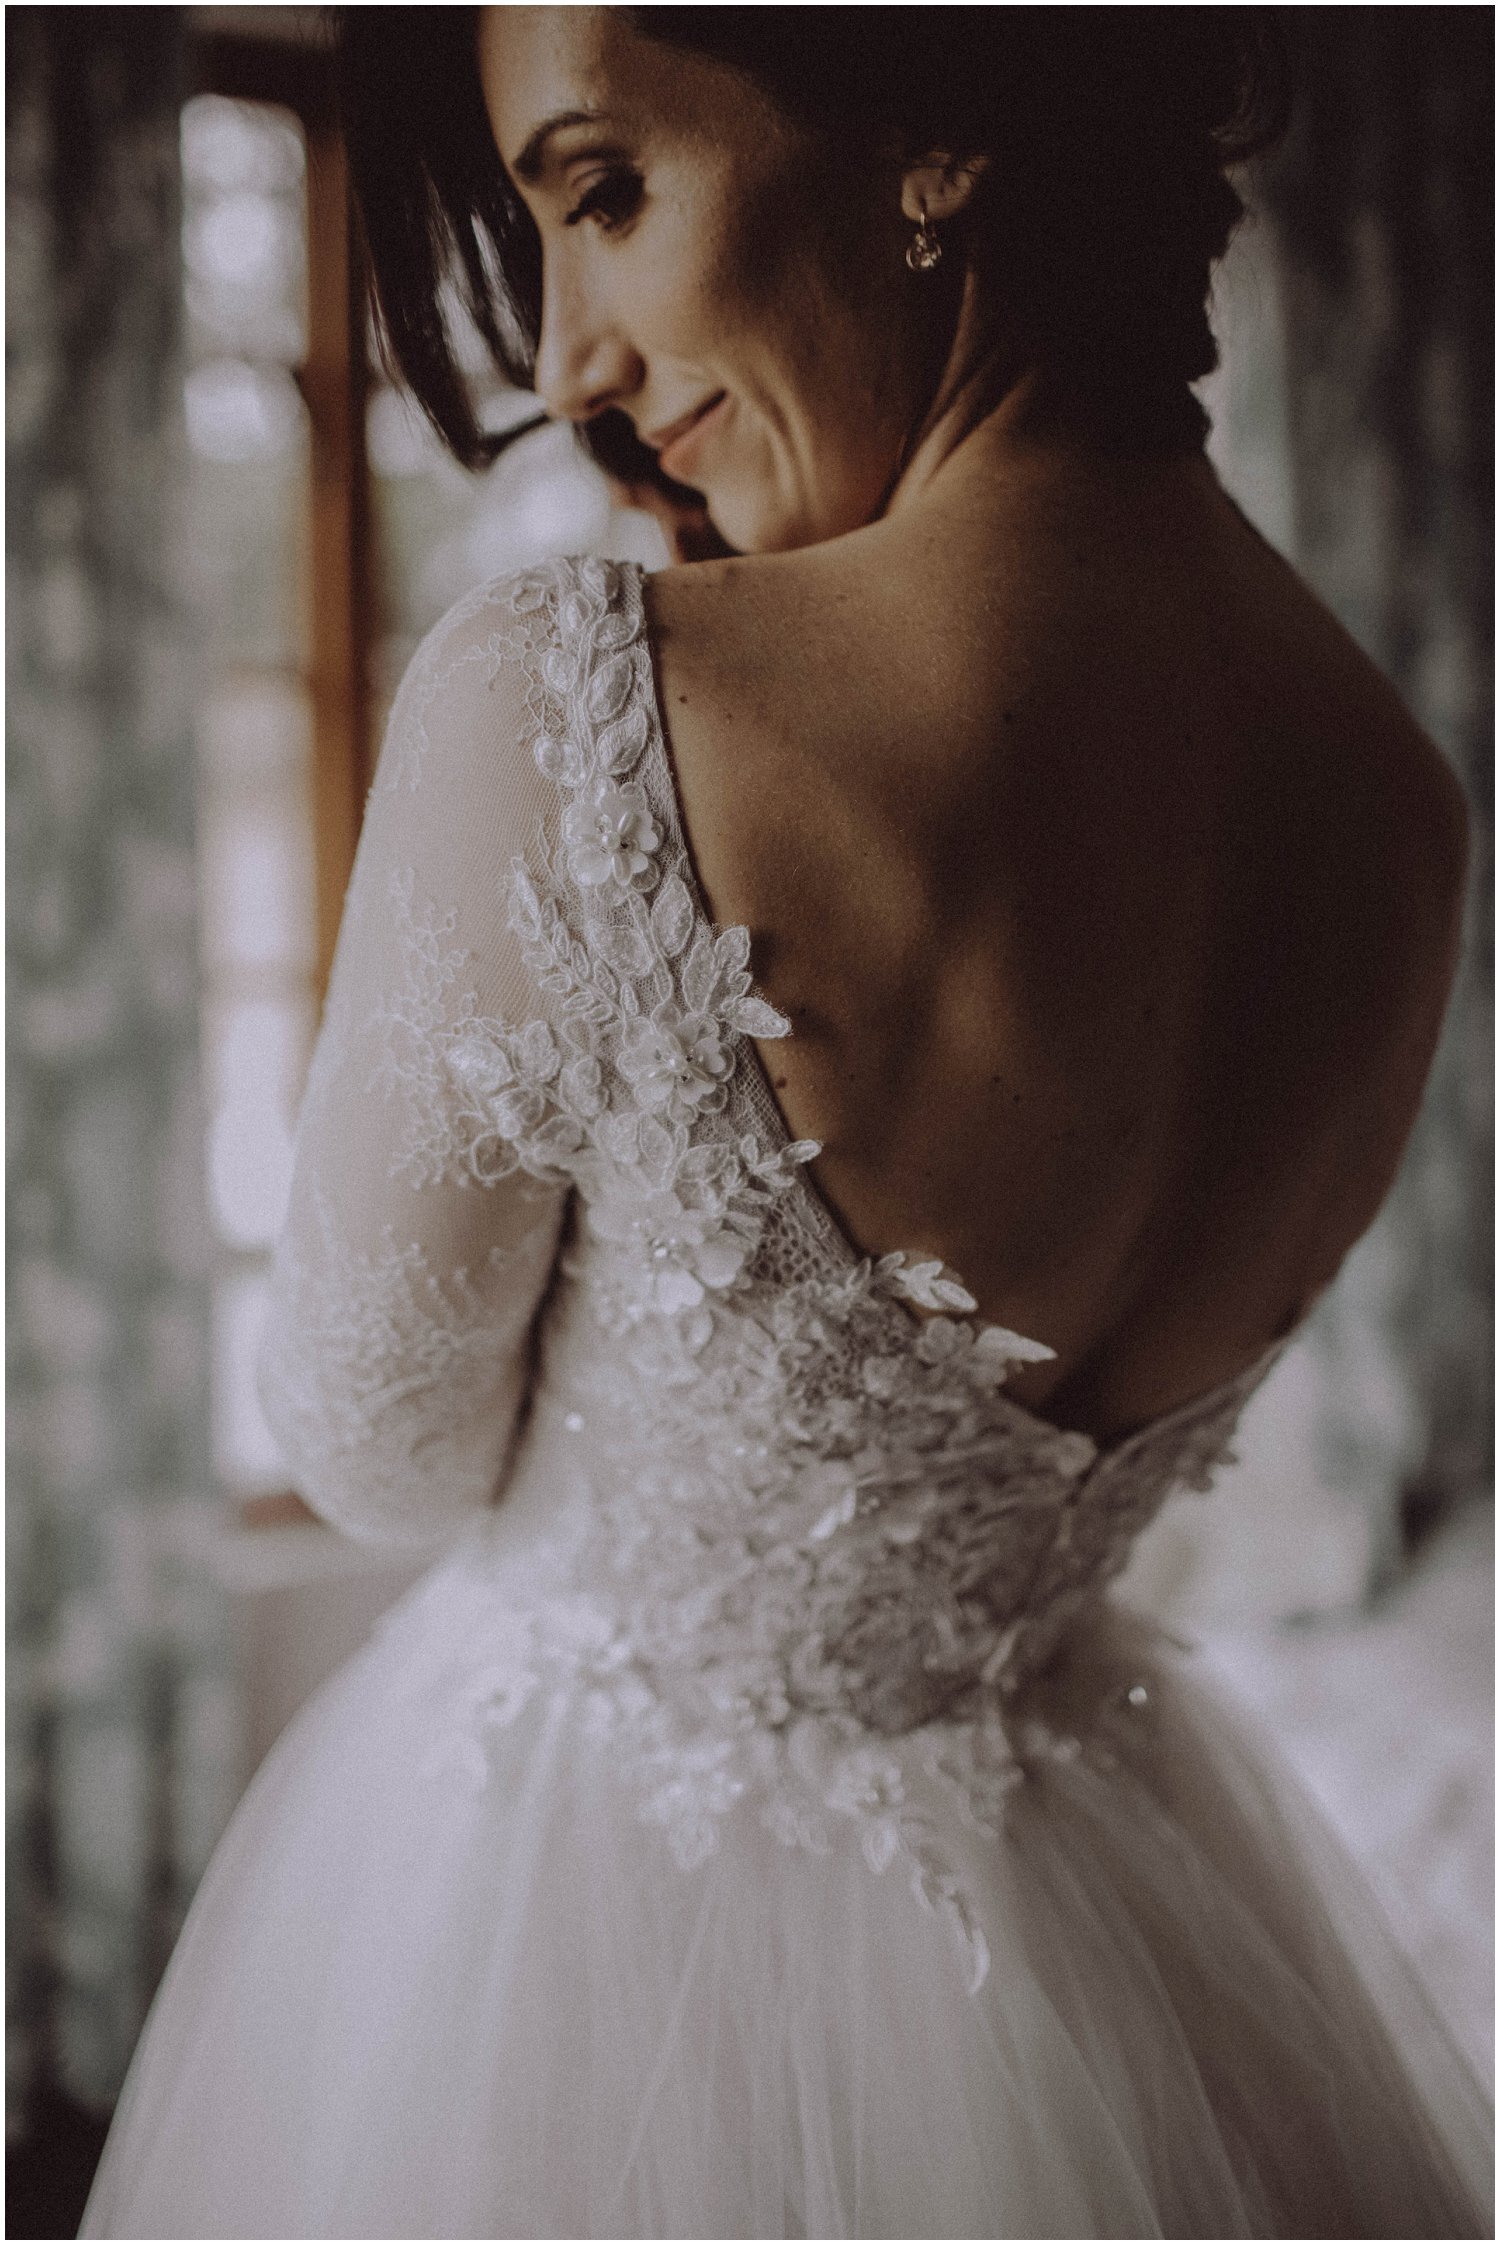 Top Wedding Photographer Cape Town South Africa Artistic Creative Documentary Wedding Photography Rue Kruger_1319.jpg